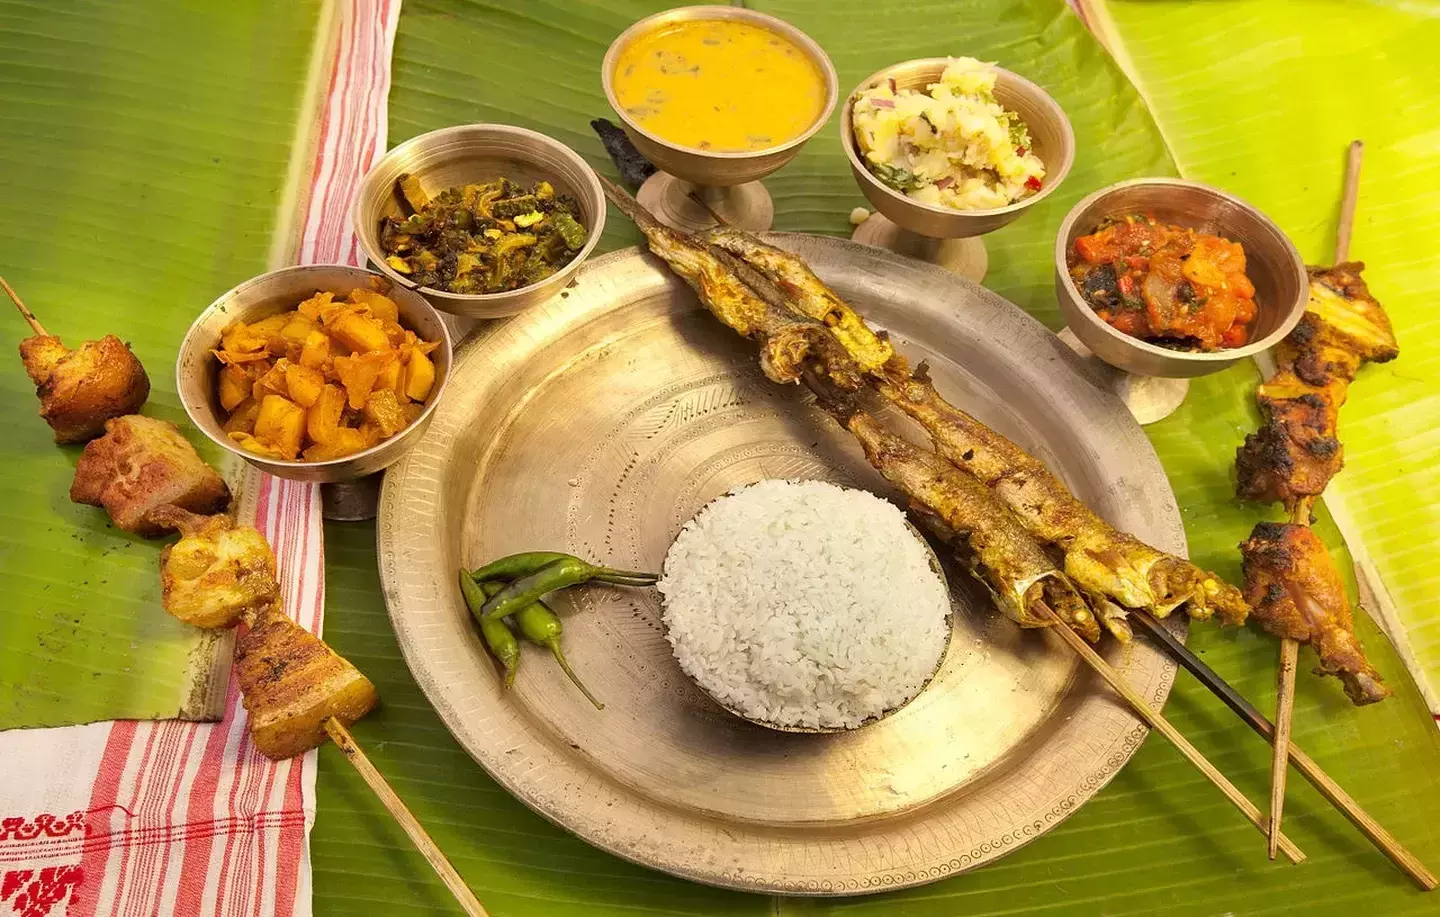 Northeast delicacies are now a hit in national capital